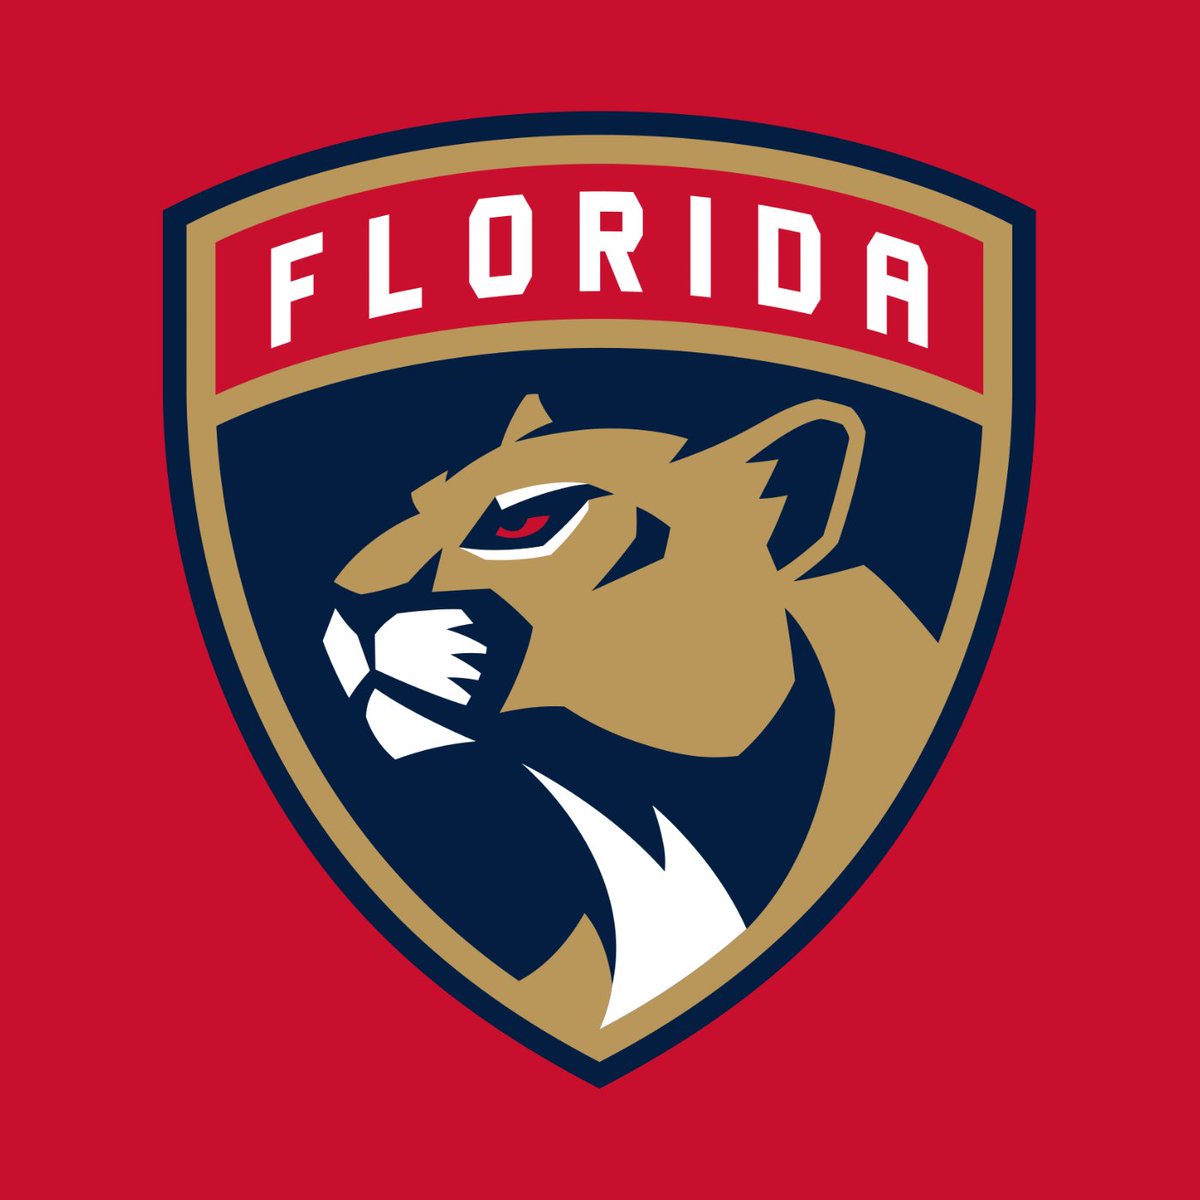 RT @NHLDraftBot: With the 190th overall selection in the NHL Draft, the Florida Panthers are proud to select: R2-D2. https://t.co/Gypcyfskmp